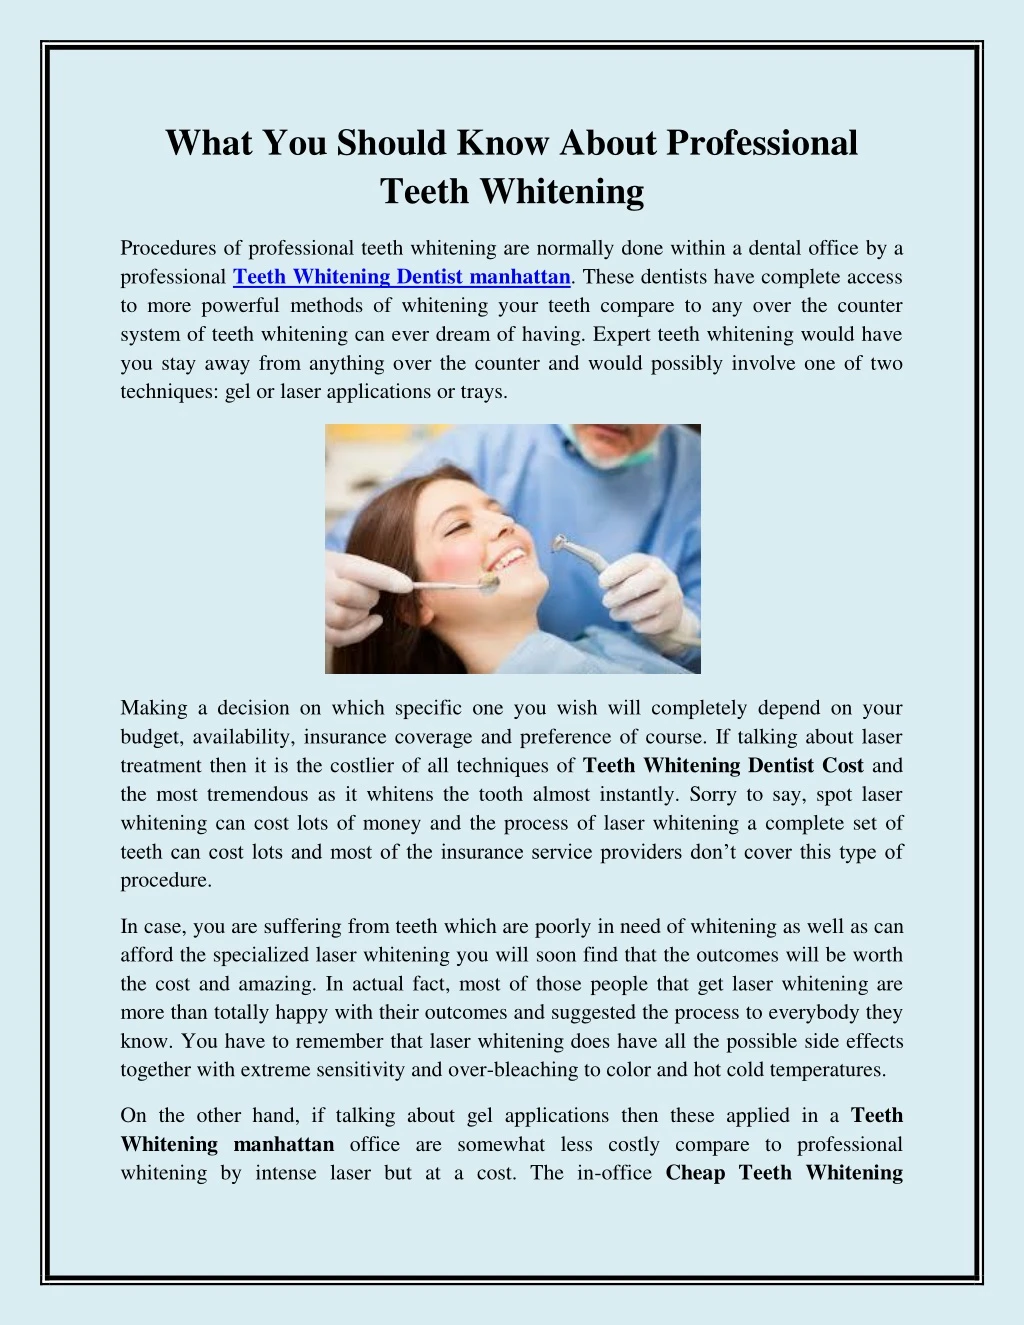 what you should know about professional teeth